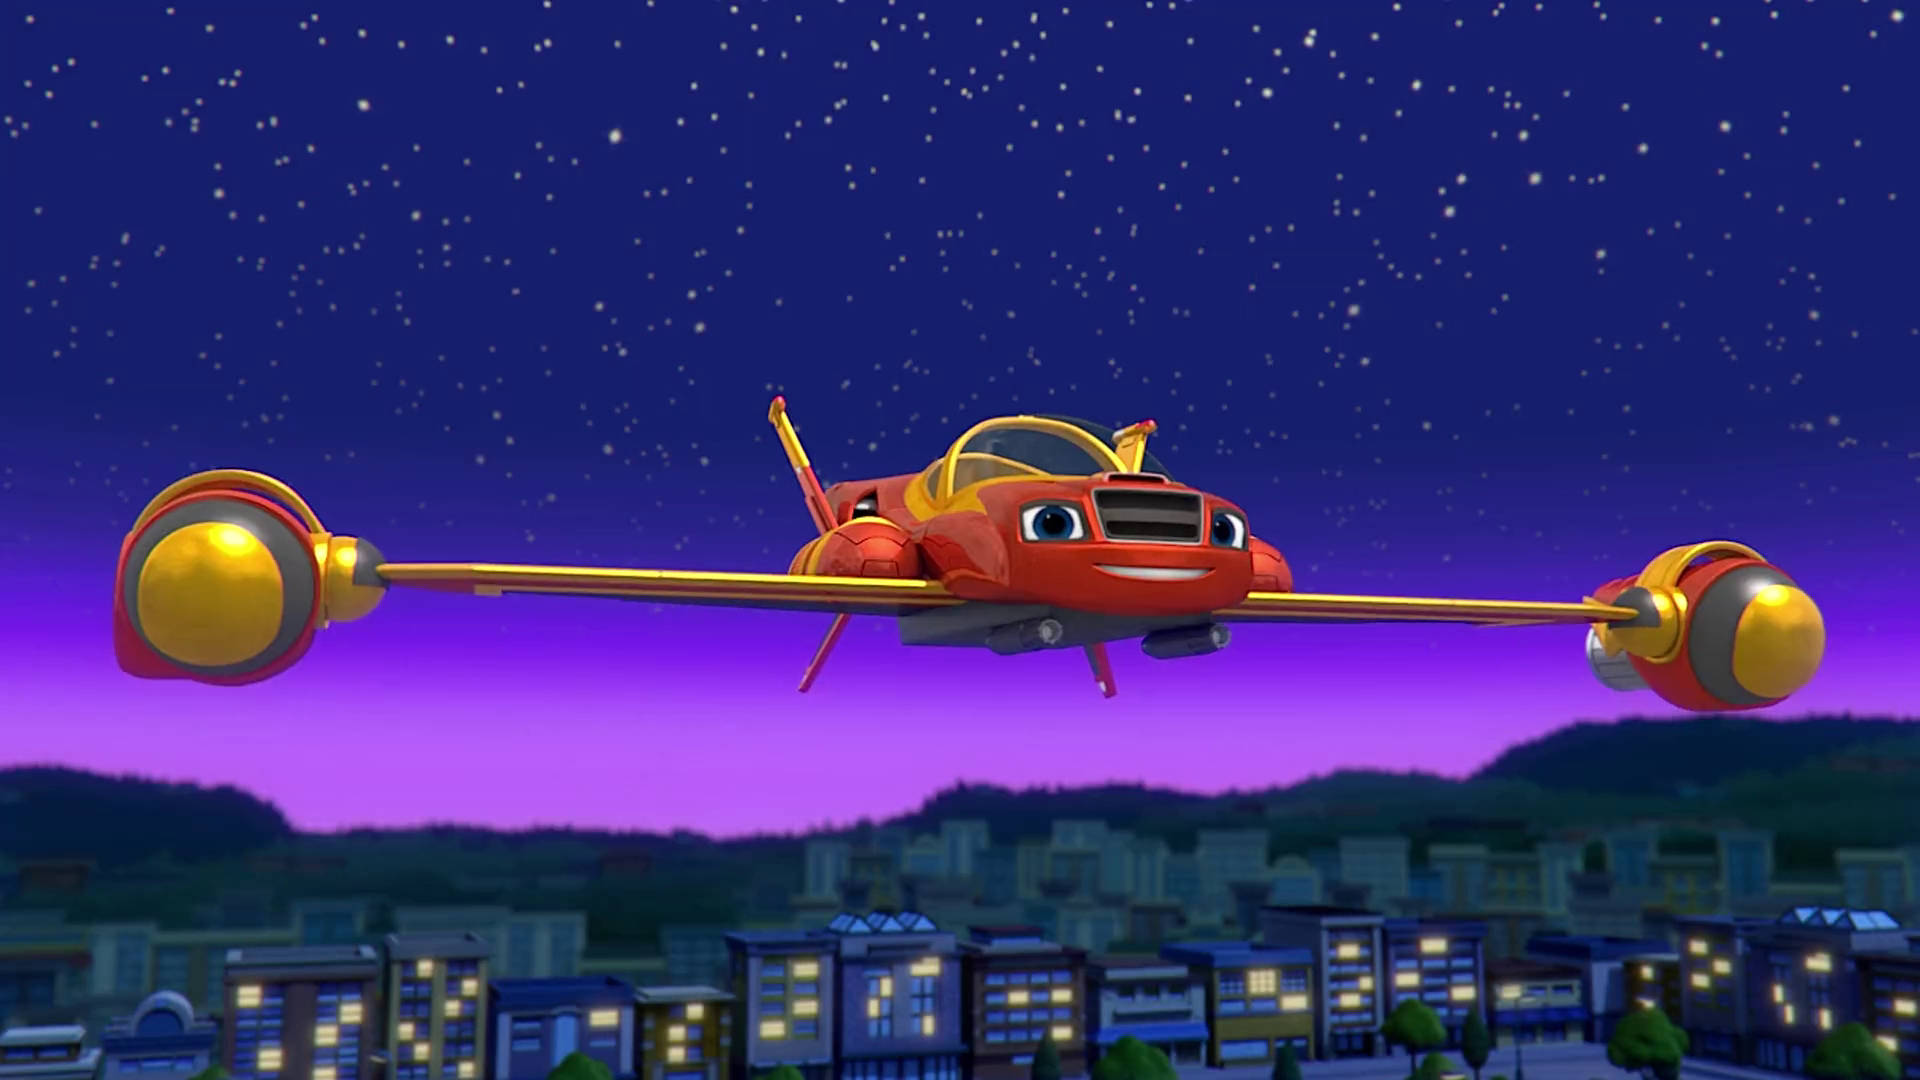 Blaze And The Monster Machines Spaceship Background